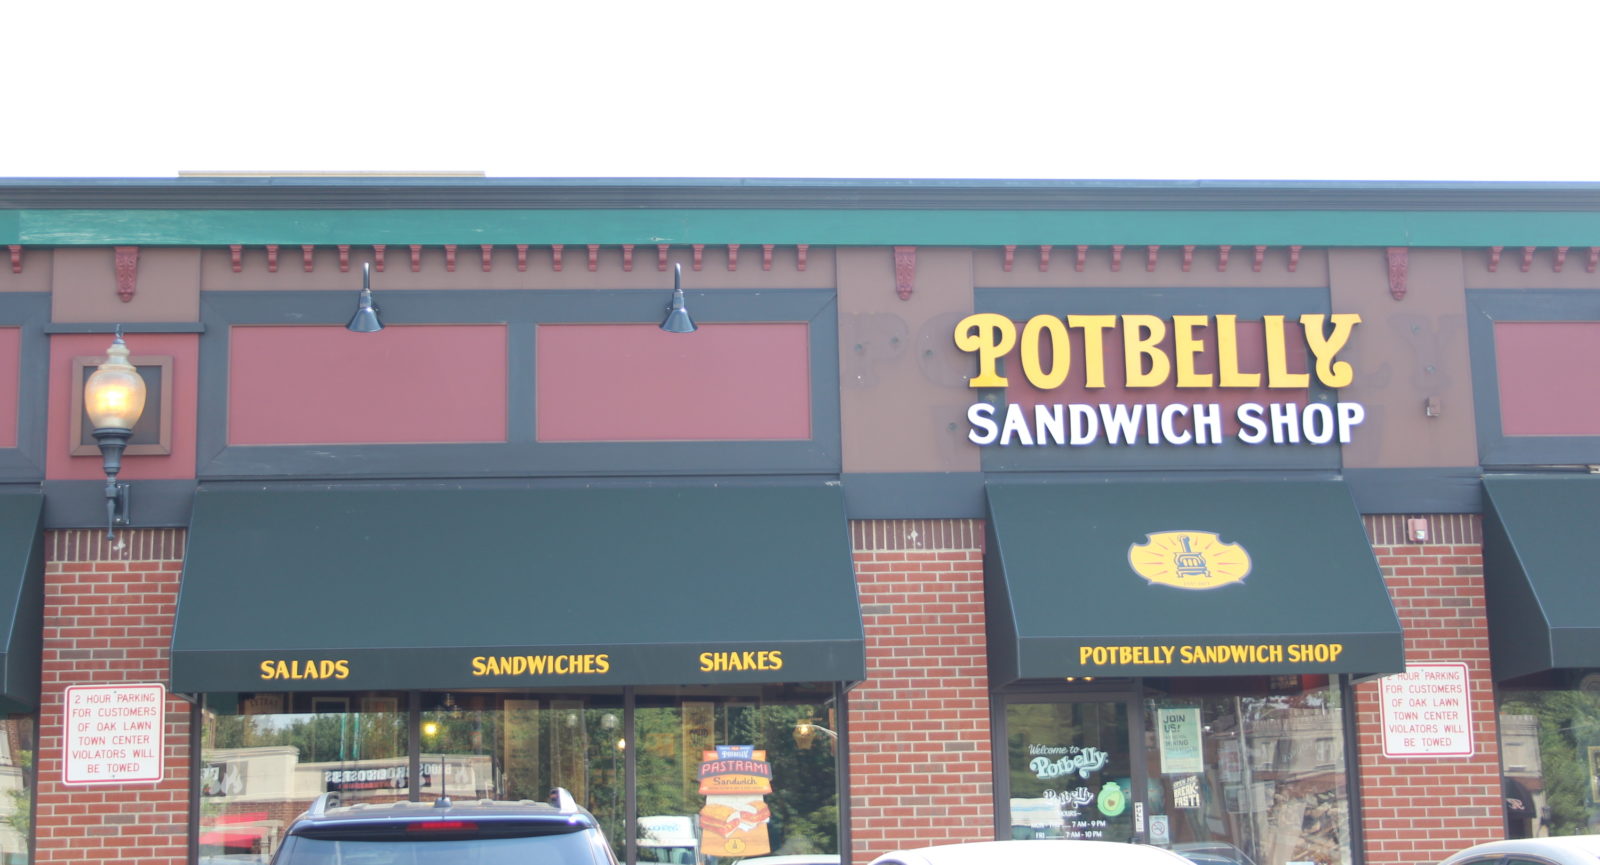 Lunch at Potbelly Sandwich Shop